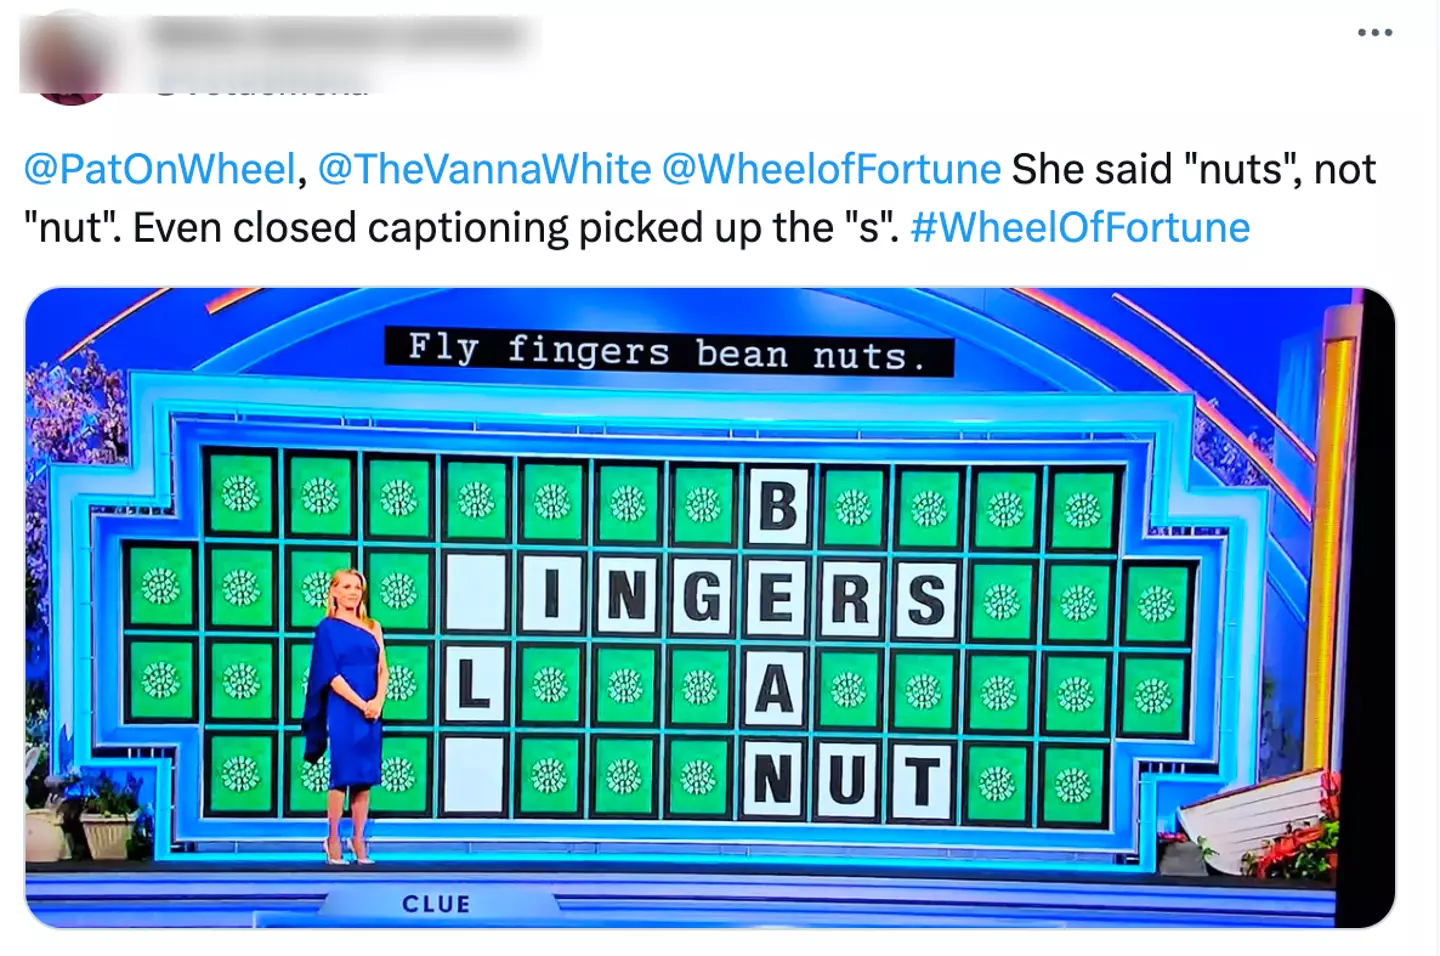 Wheel of Fortune fans insist that the woman said 'nuts'.